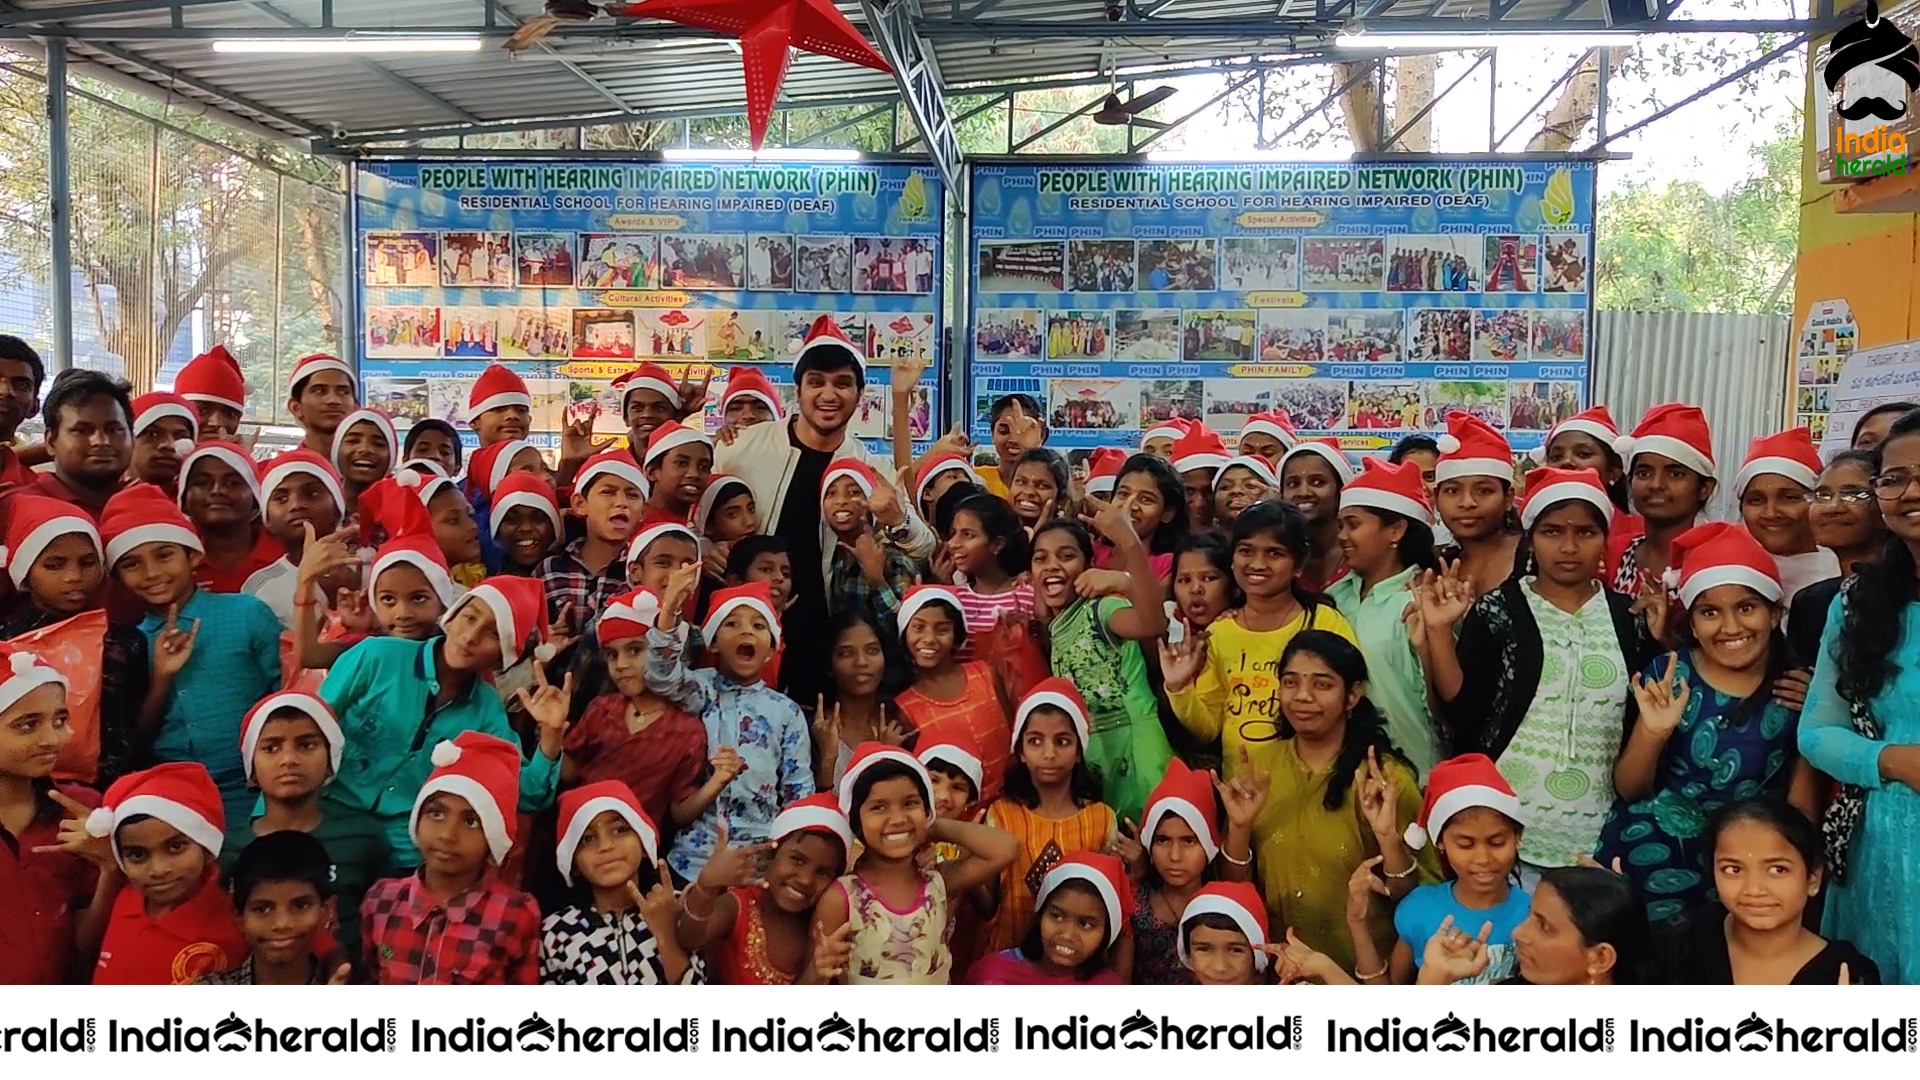 Hero Nikhil celebrated Christmas with physically challenged kids